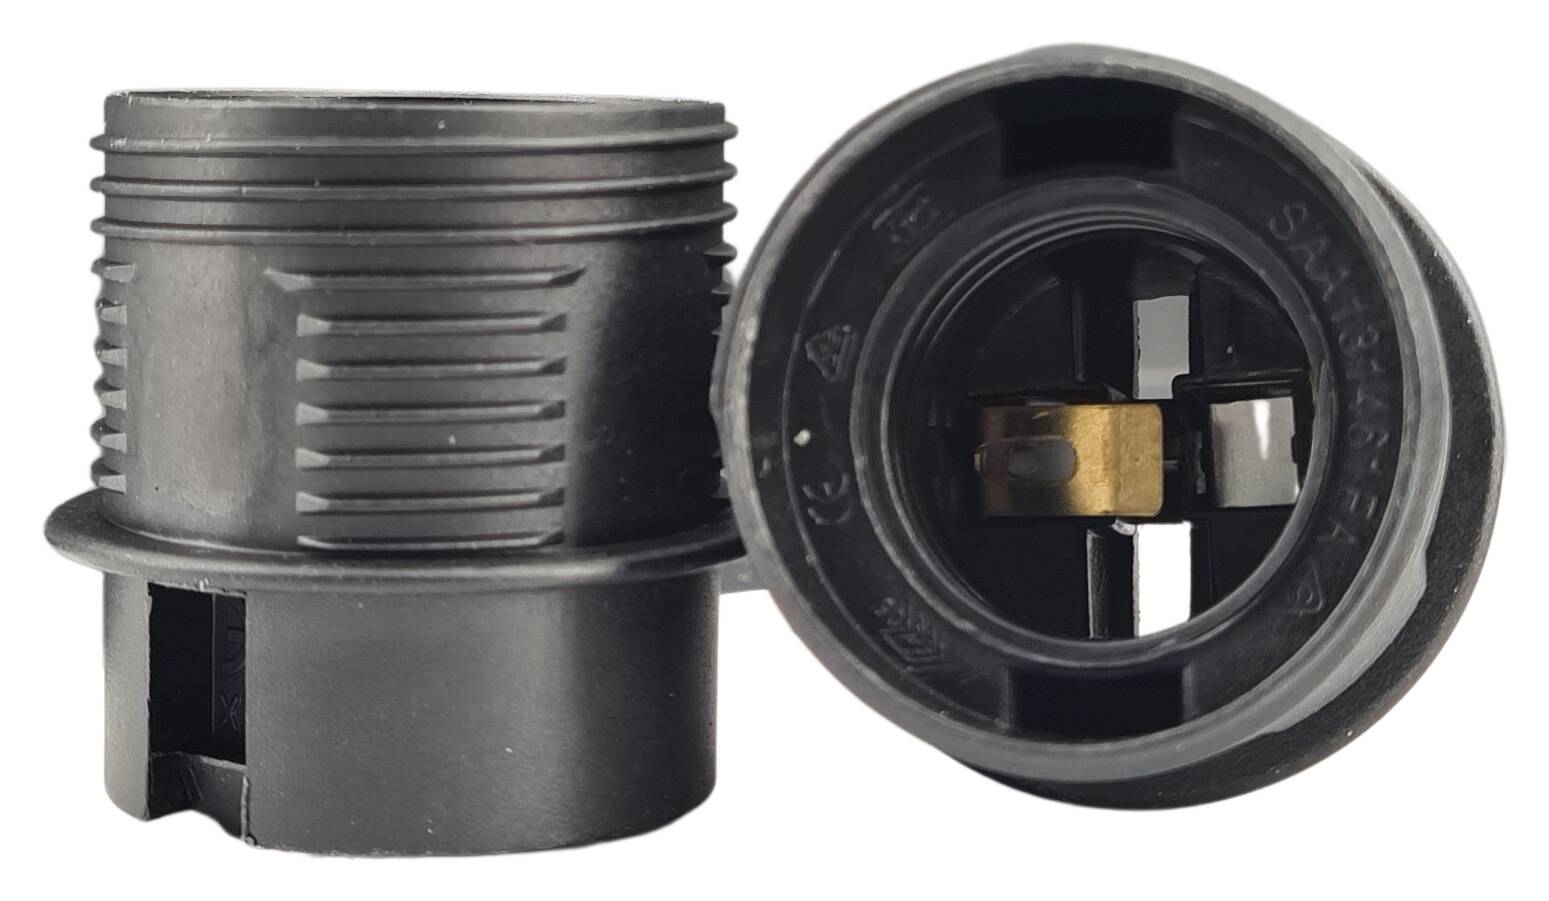 E14 partial-threaded for thermoplastic lampholder black